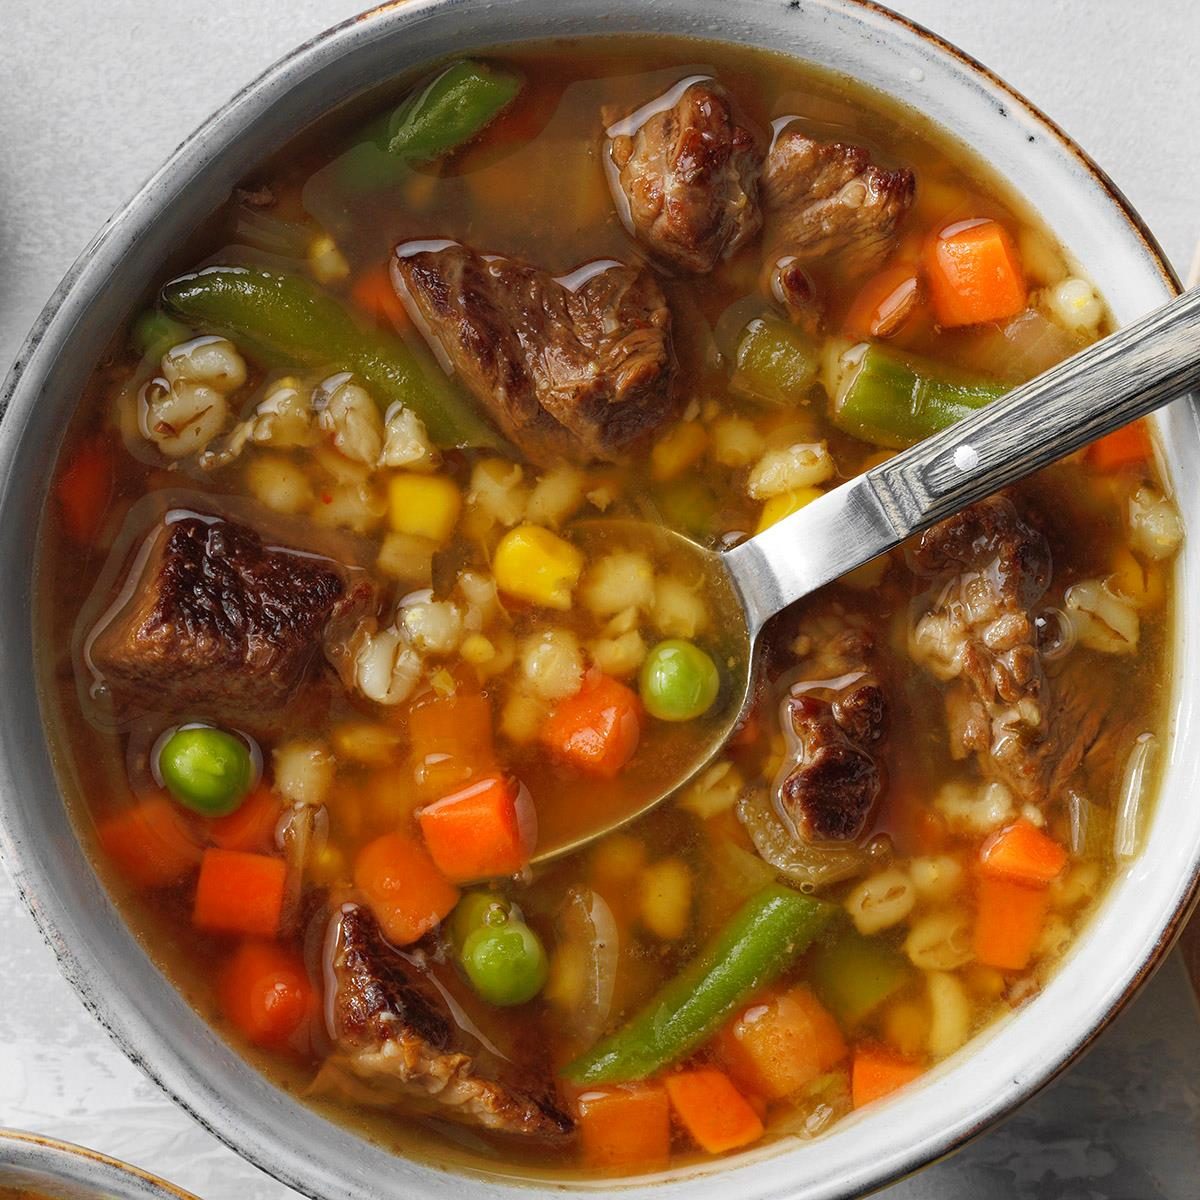 Cubed Beef And Barley Soup Exps Tohedscodr22 91104 E12 02 7b